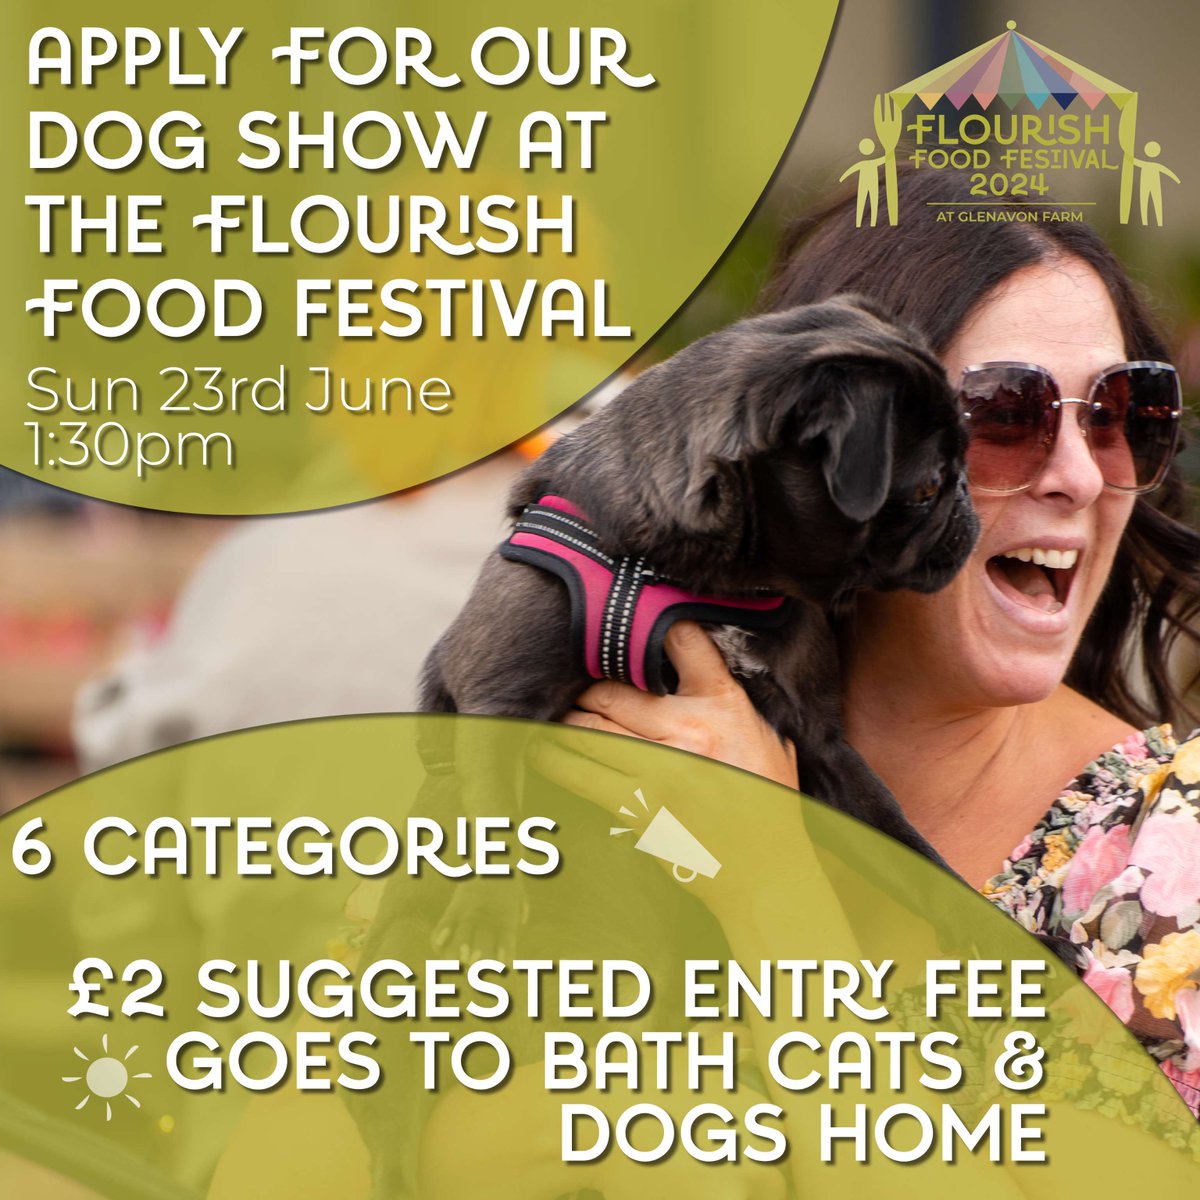 You can now apply to show off your furry friend at the #FlourishFoodFest! 🐕‍🦺 Bring your pup along for a #dogshow on Sun 23rd June at 1:30pm, with the £2 suggested entry fee going to Bath Cats & Dogs Home (@BathCDH) 🎉 Apply by filling in the form 👇 ow.ly/4wcX50Re7CN